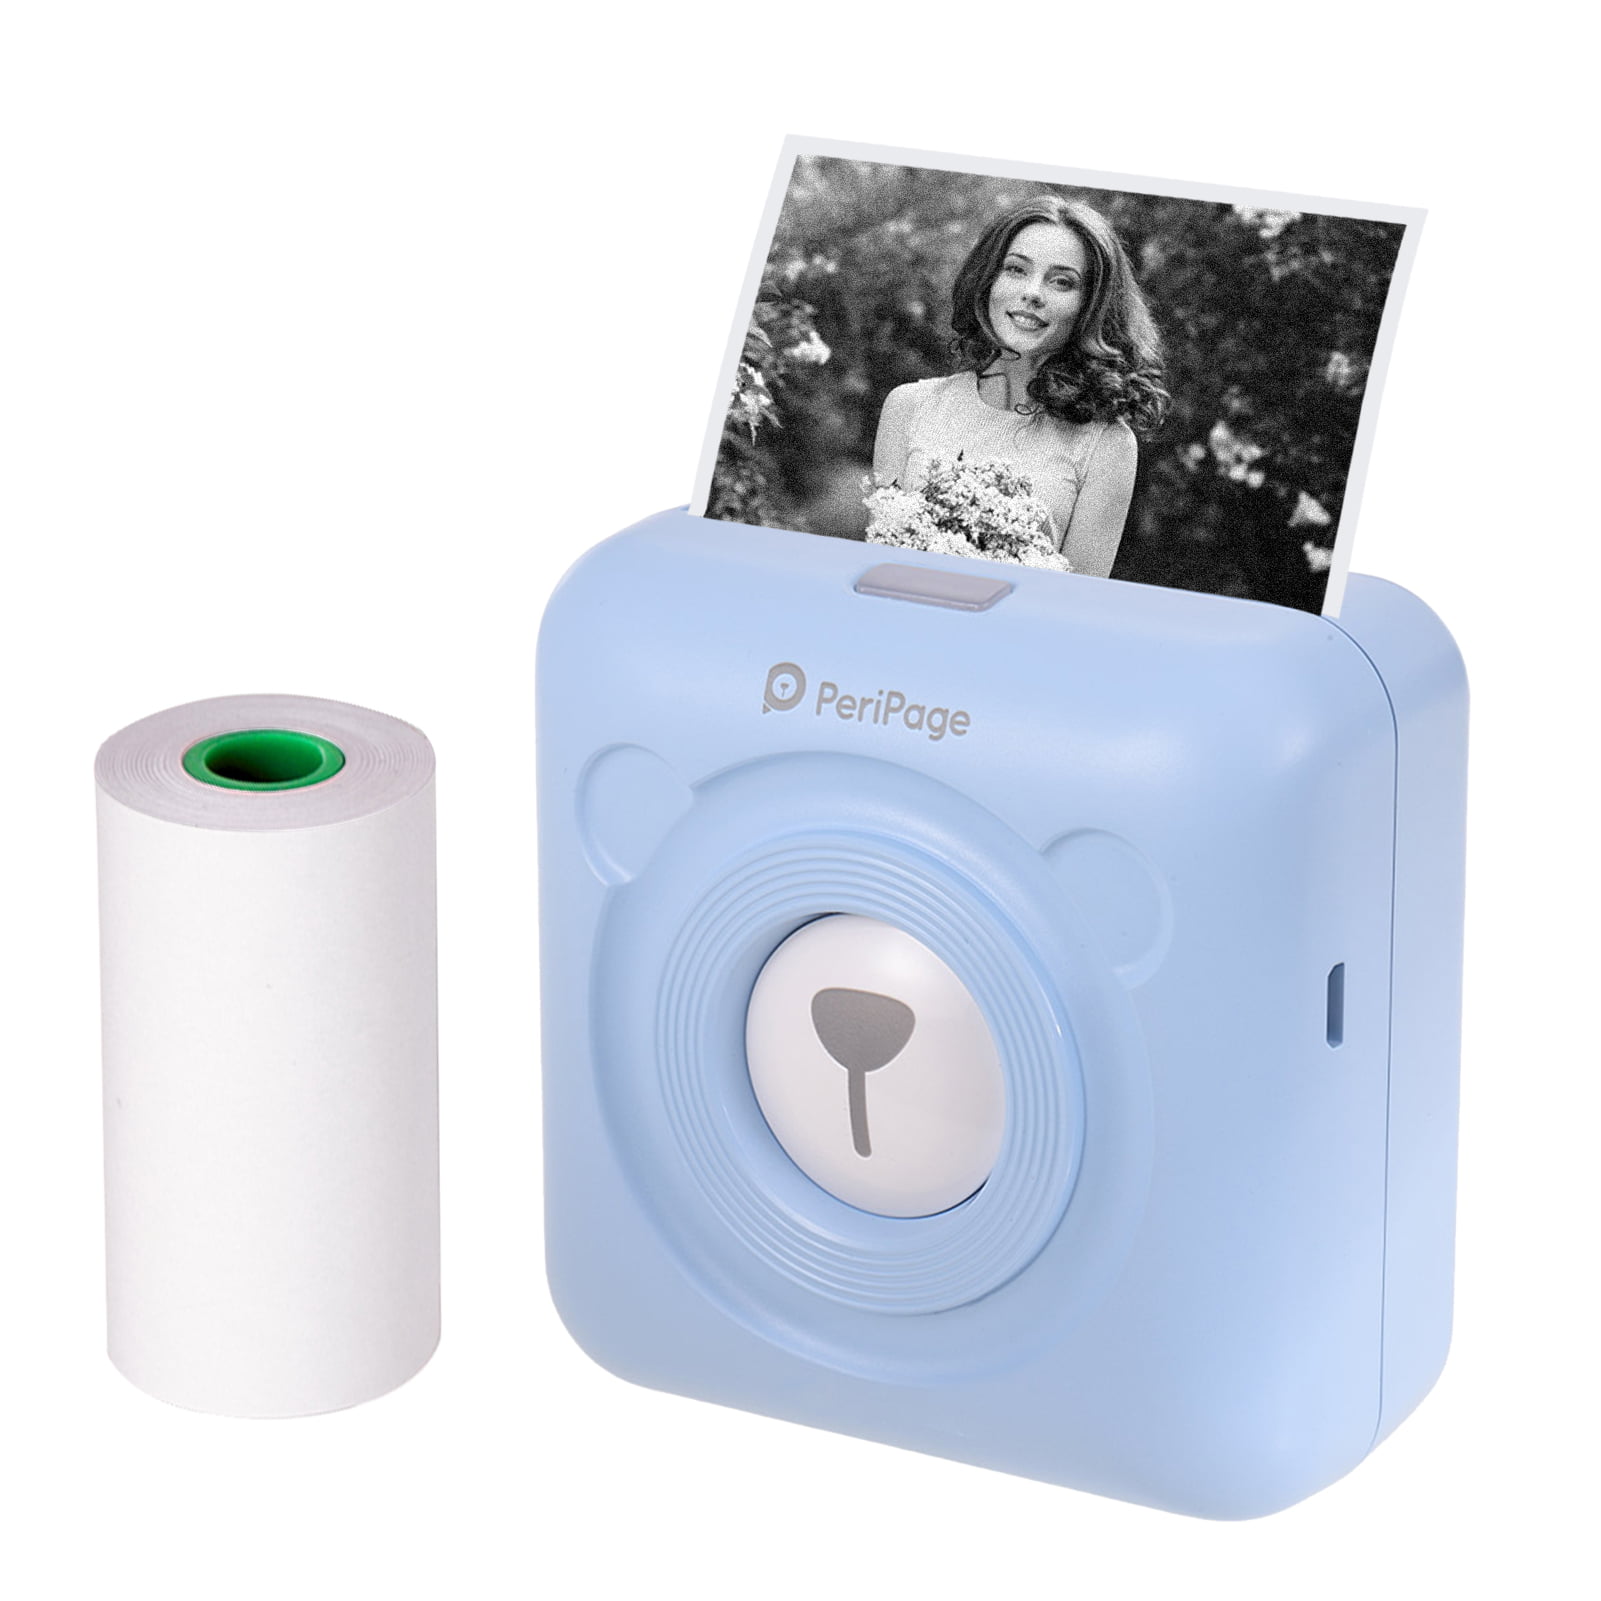 for All Smartphone Bluetooth Wireless Portable Printer Black-White Notes Picture Memo Receipt Thermal Instant Label Maker with 5 Printing Paper Mini Printer Photo Printer Blue 